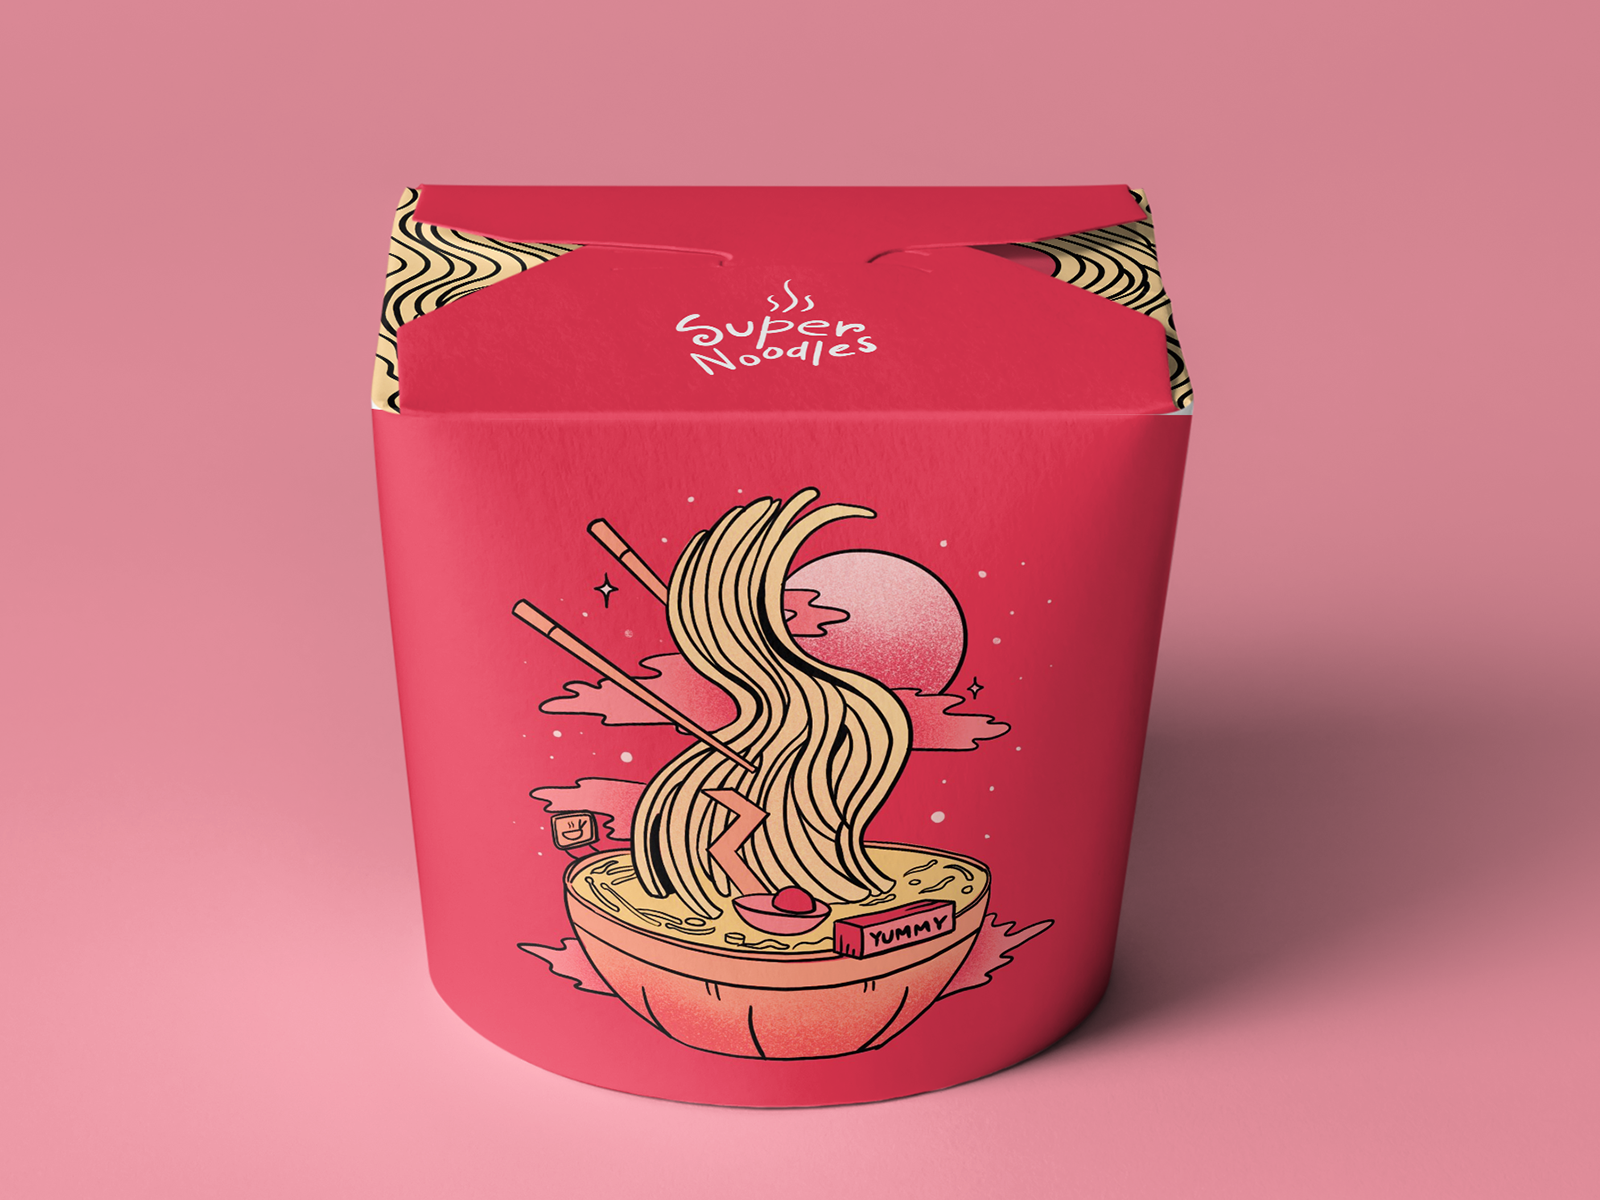 Download Noodles Packaging Design by Loud Mob Media on Dribbble